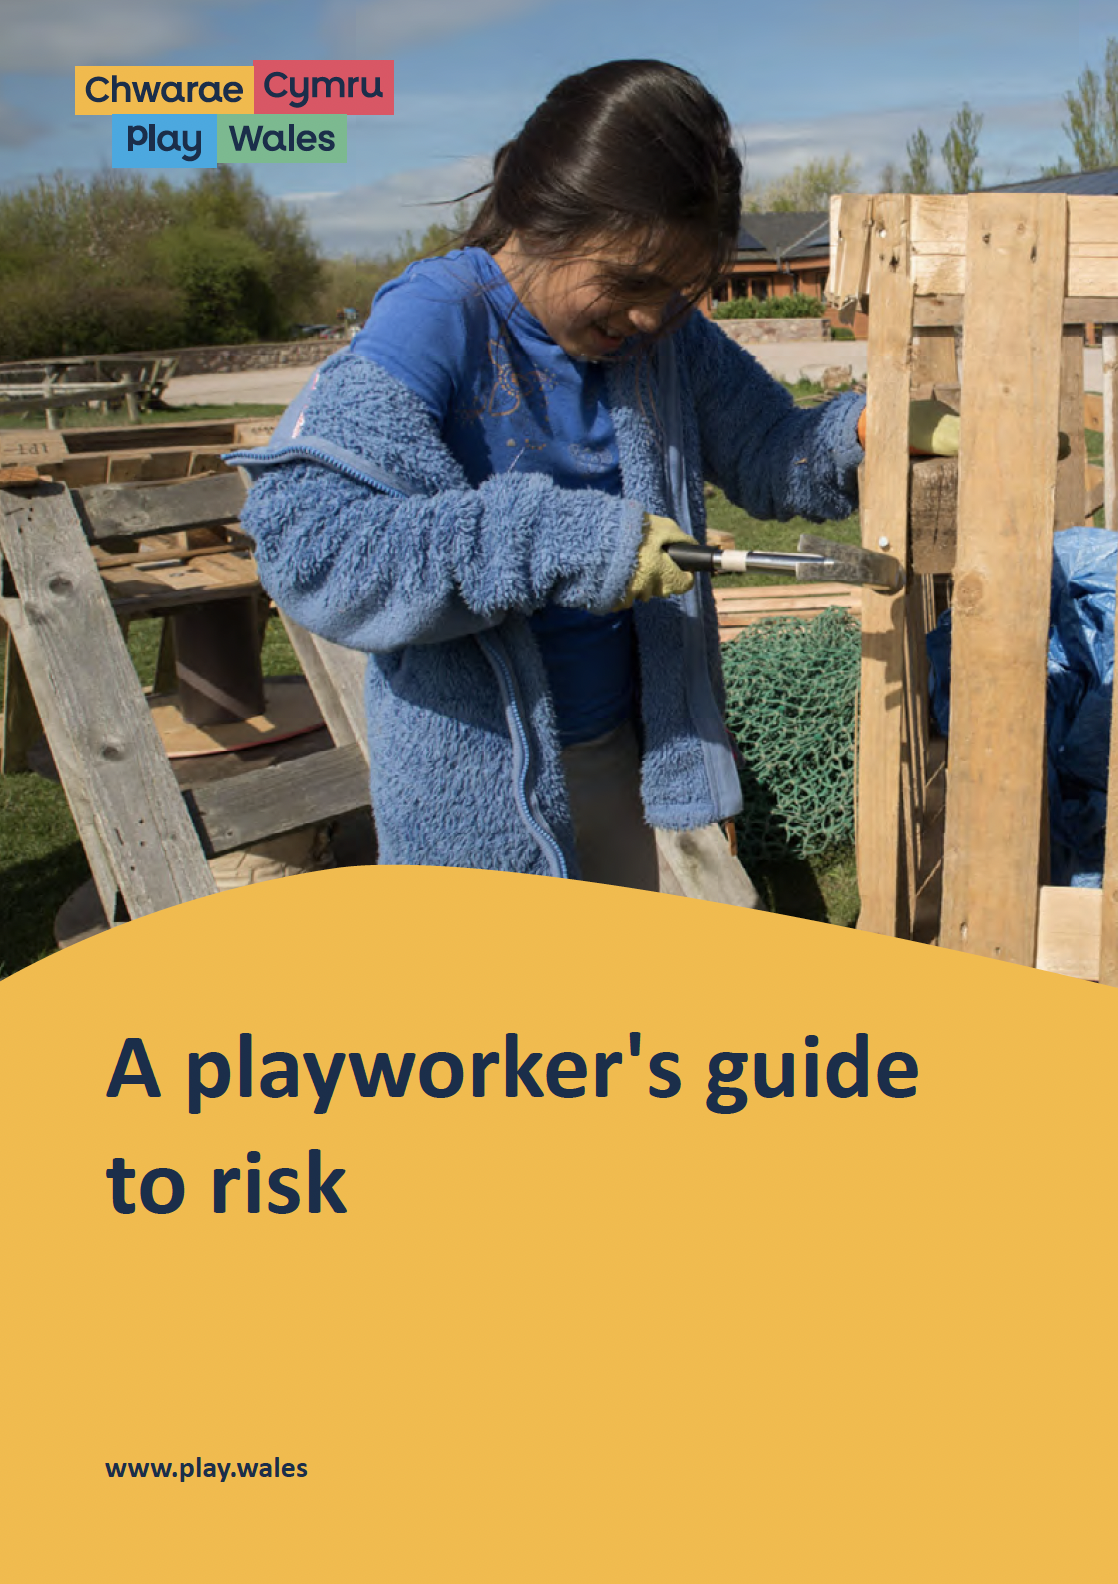 A playworker’s guide to risk